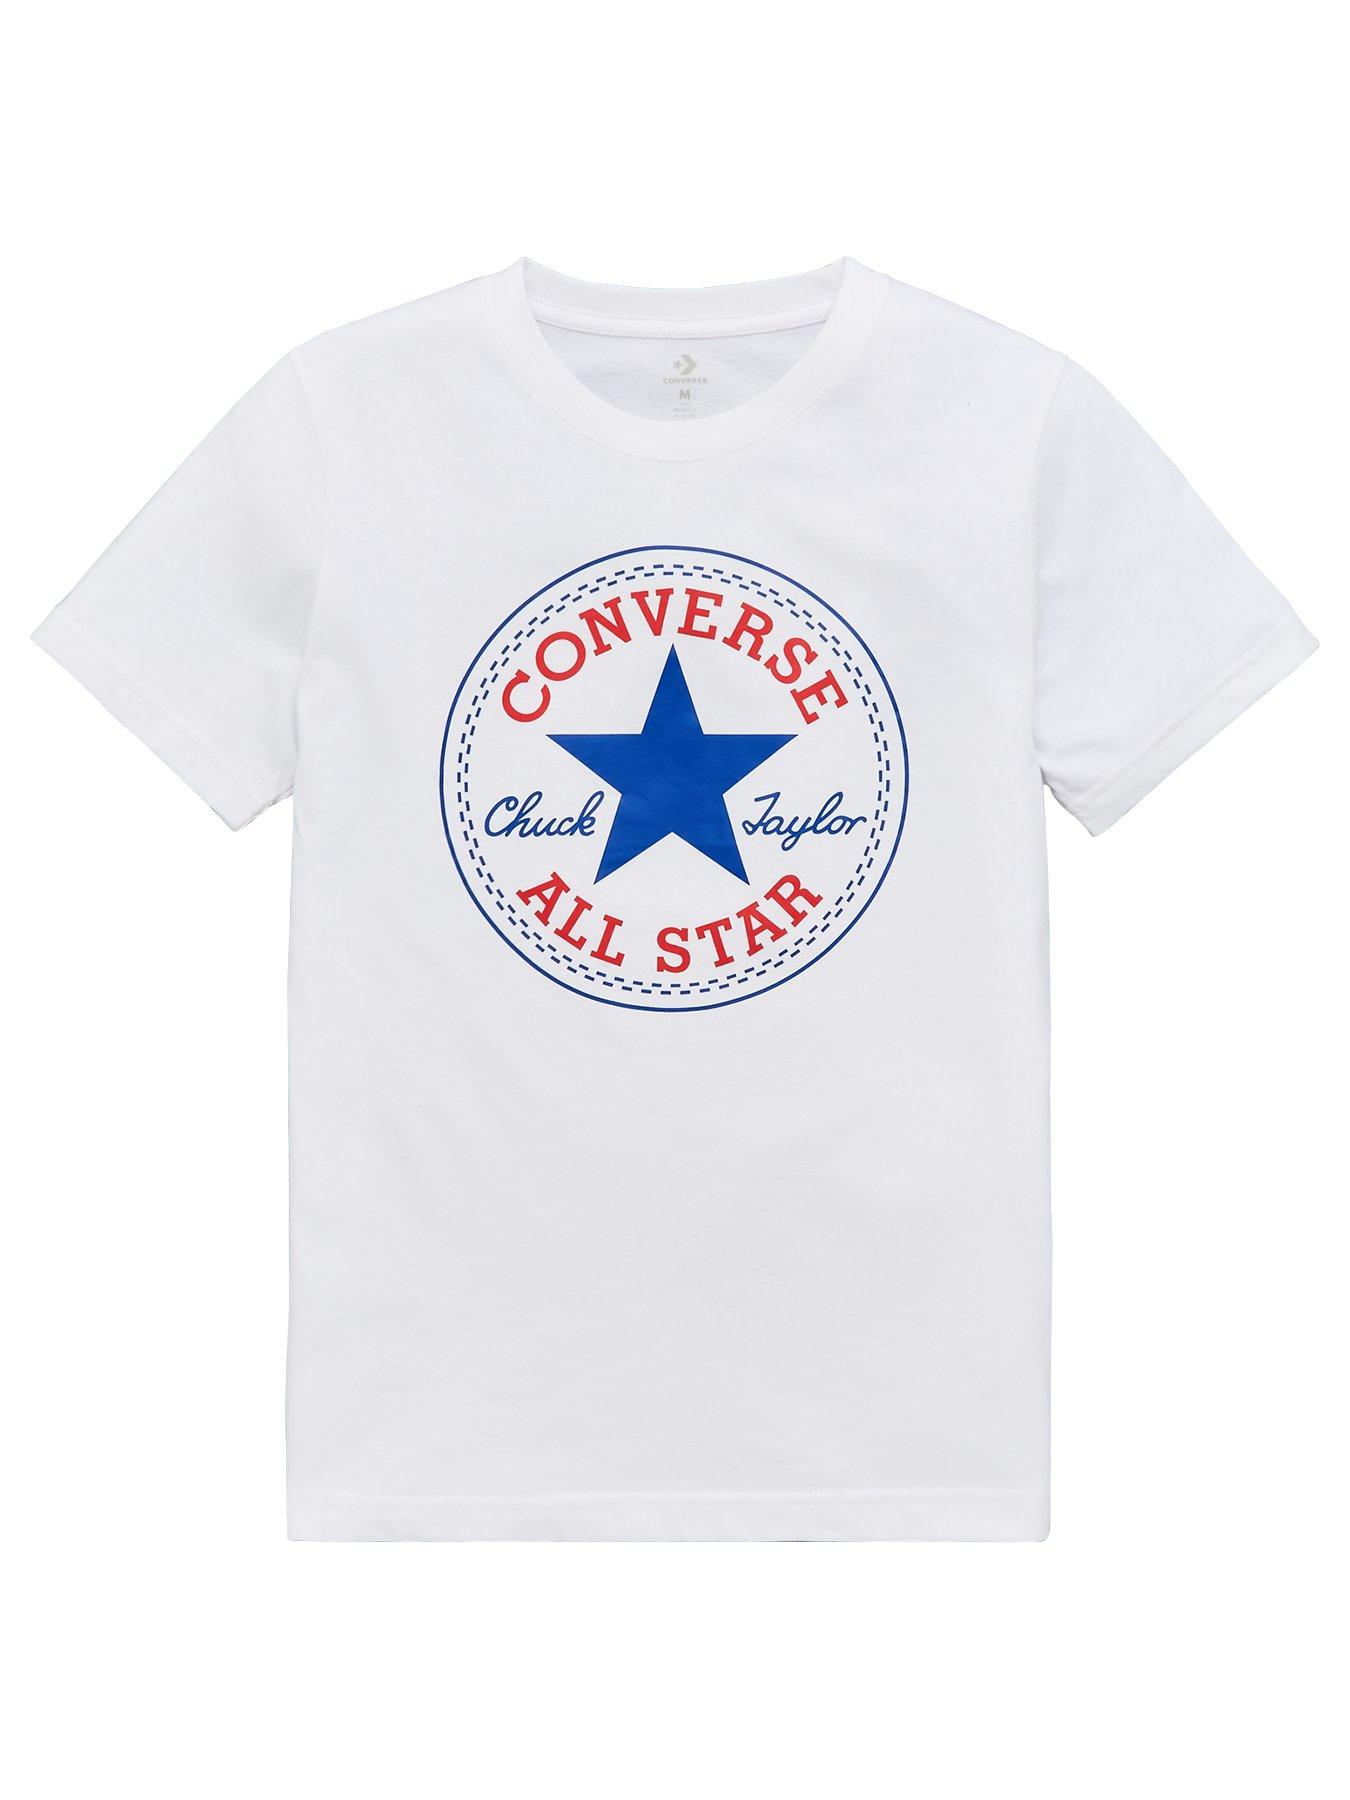 converse clothing childrens